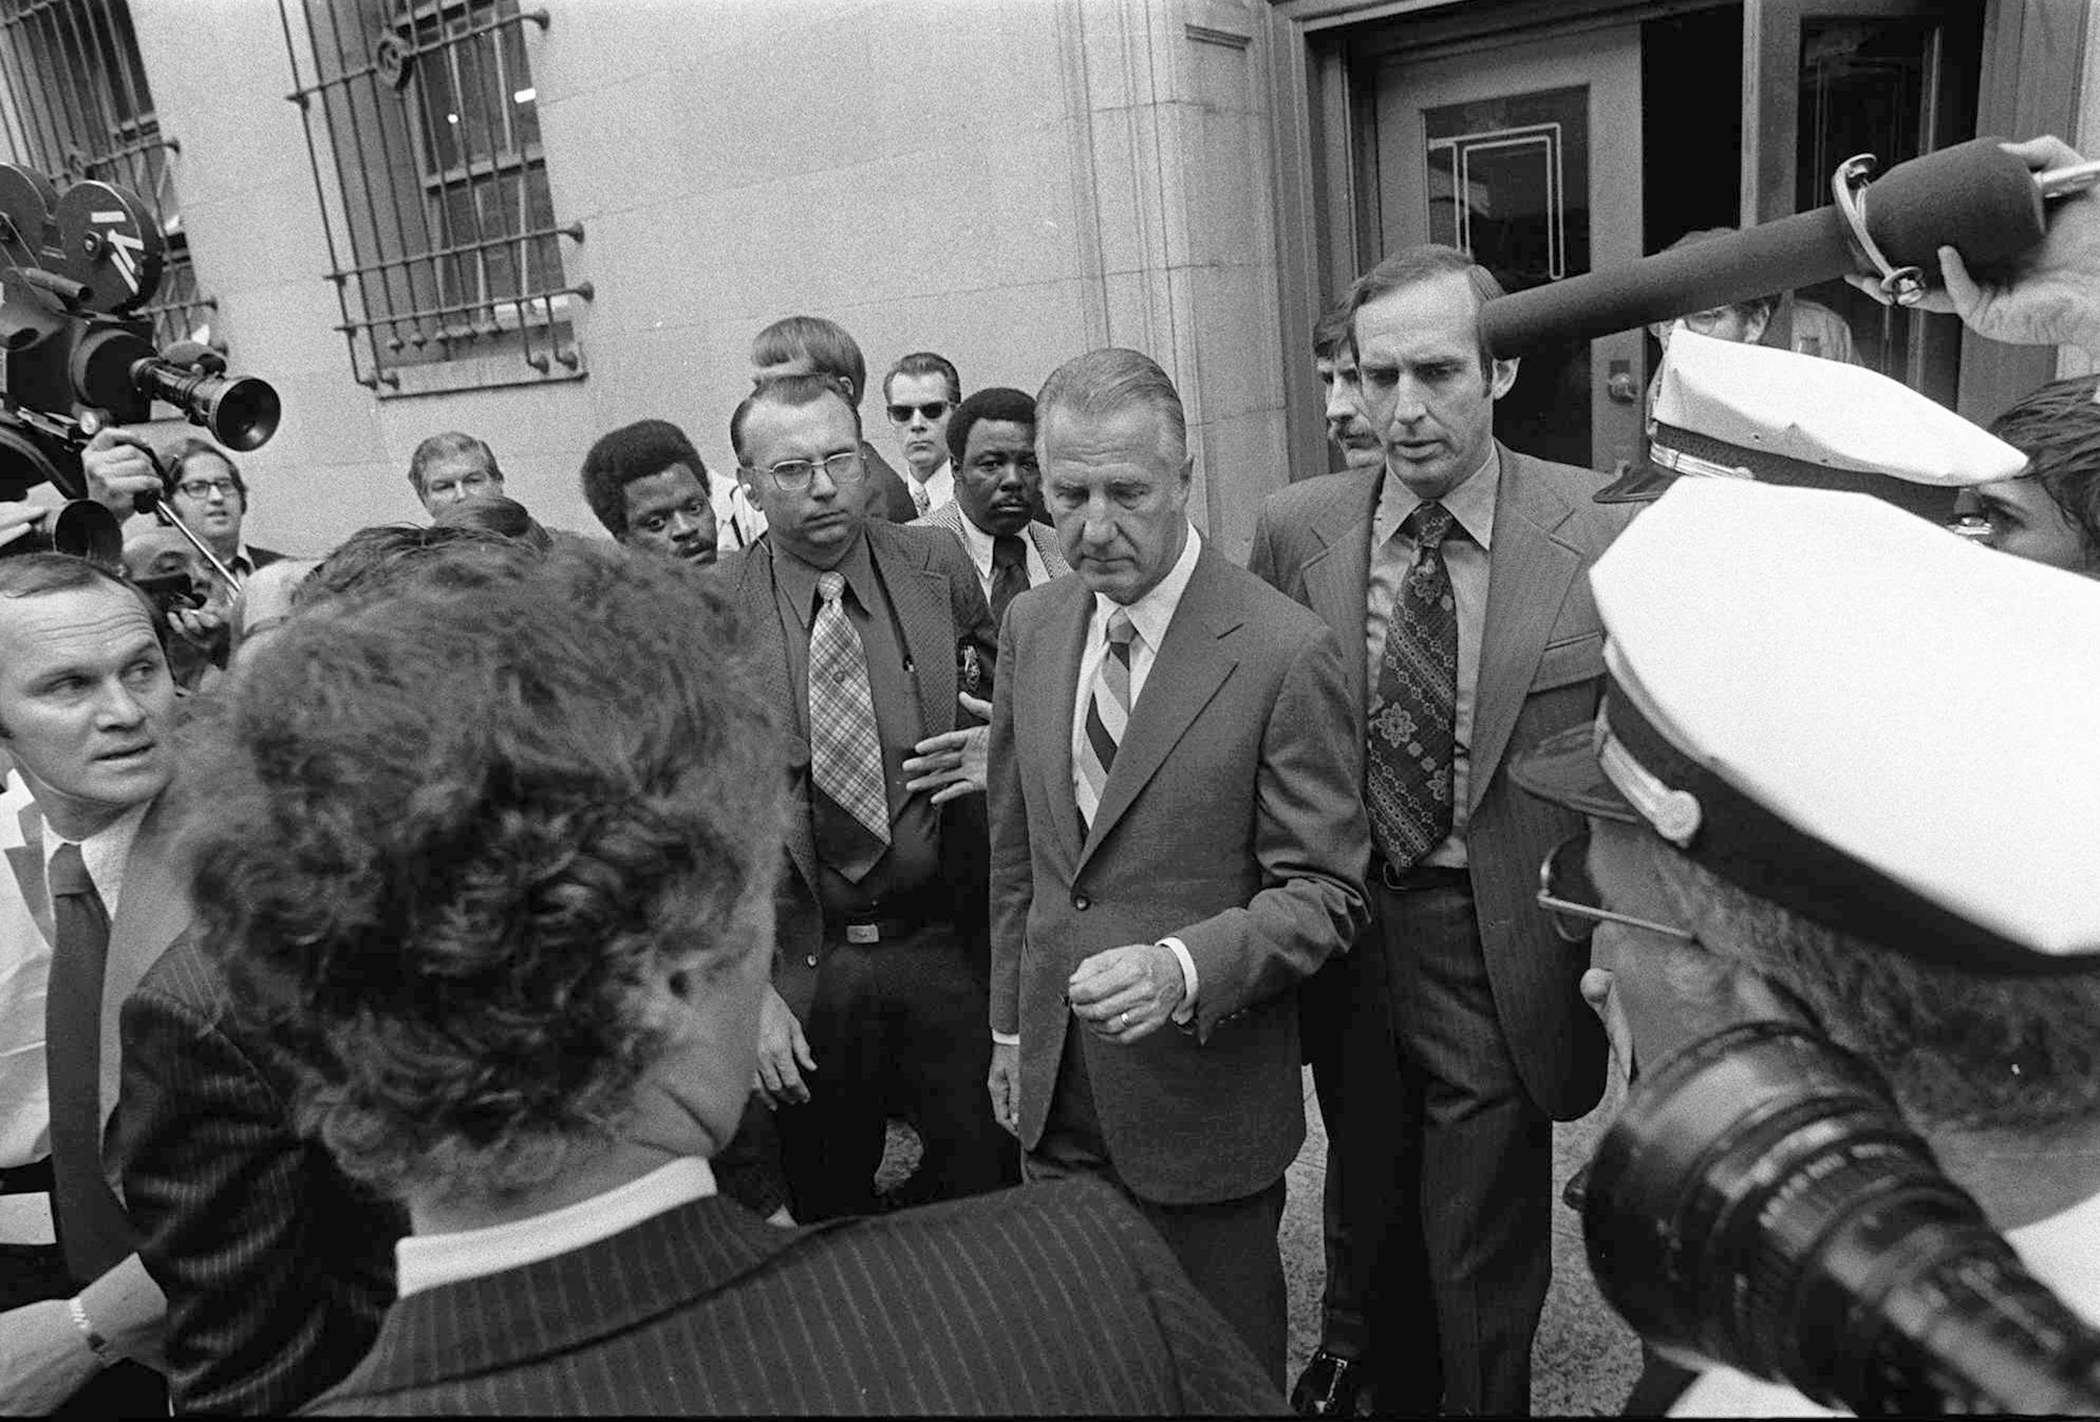 Spiro T. Agnew, center, is shown leaving court in Baltimore Oct. 10, 1973 after pleading no contest to a charge of income tax evasion. Agnew resigned from the Vice Presidency shortly after.